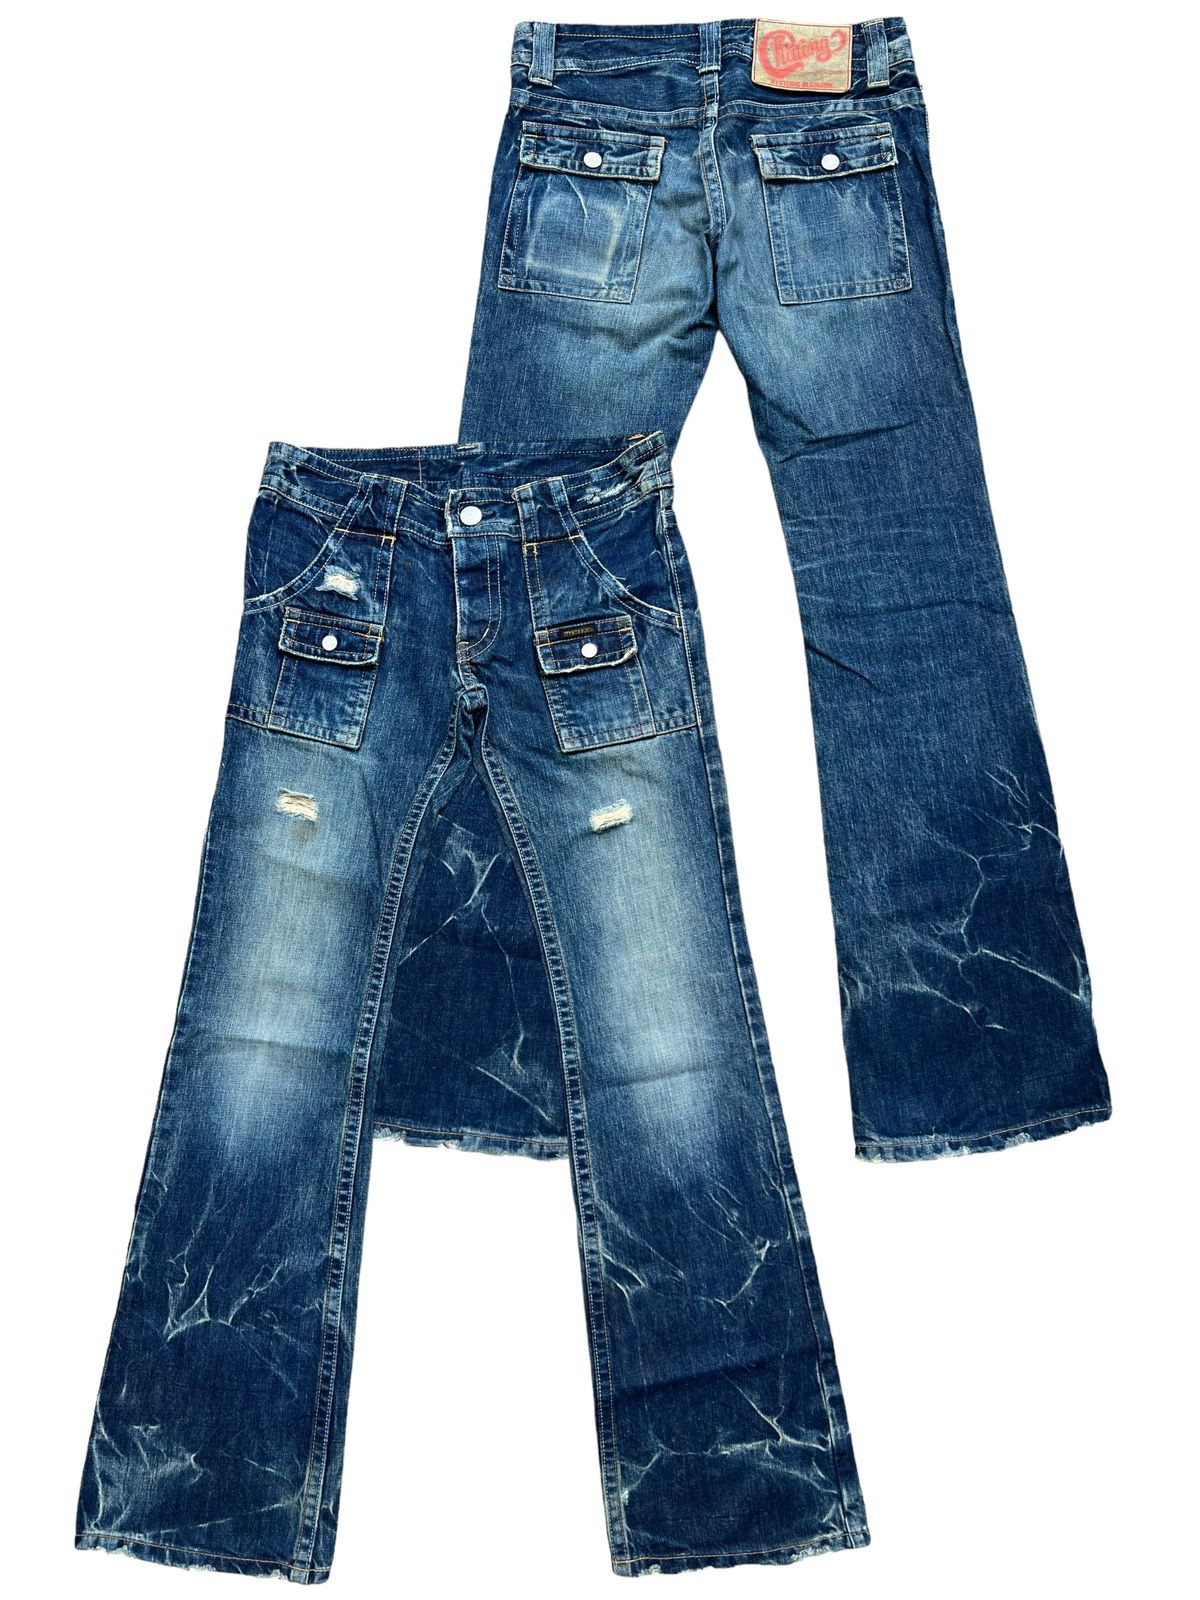 Hysteric Glamour Distressed Flare Punk Denim Jeans 31x32 - 1